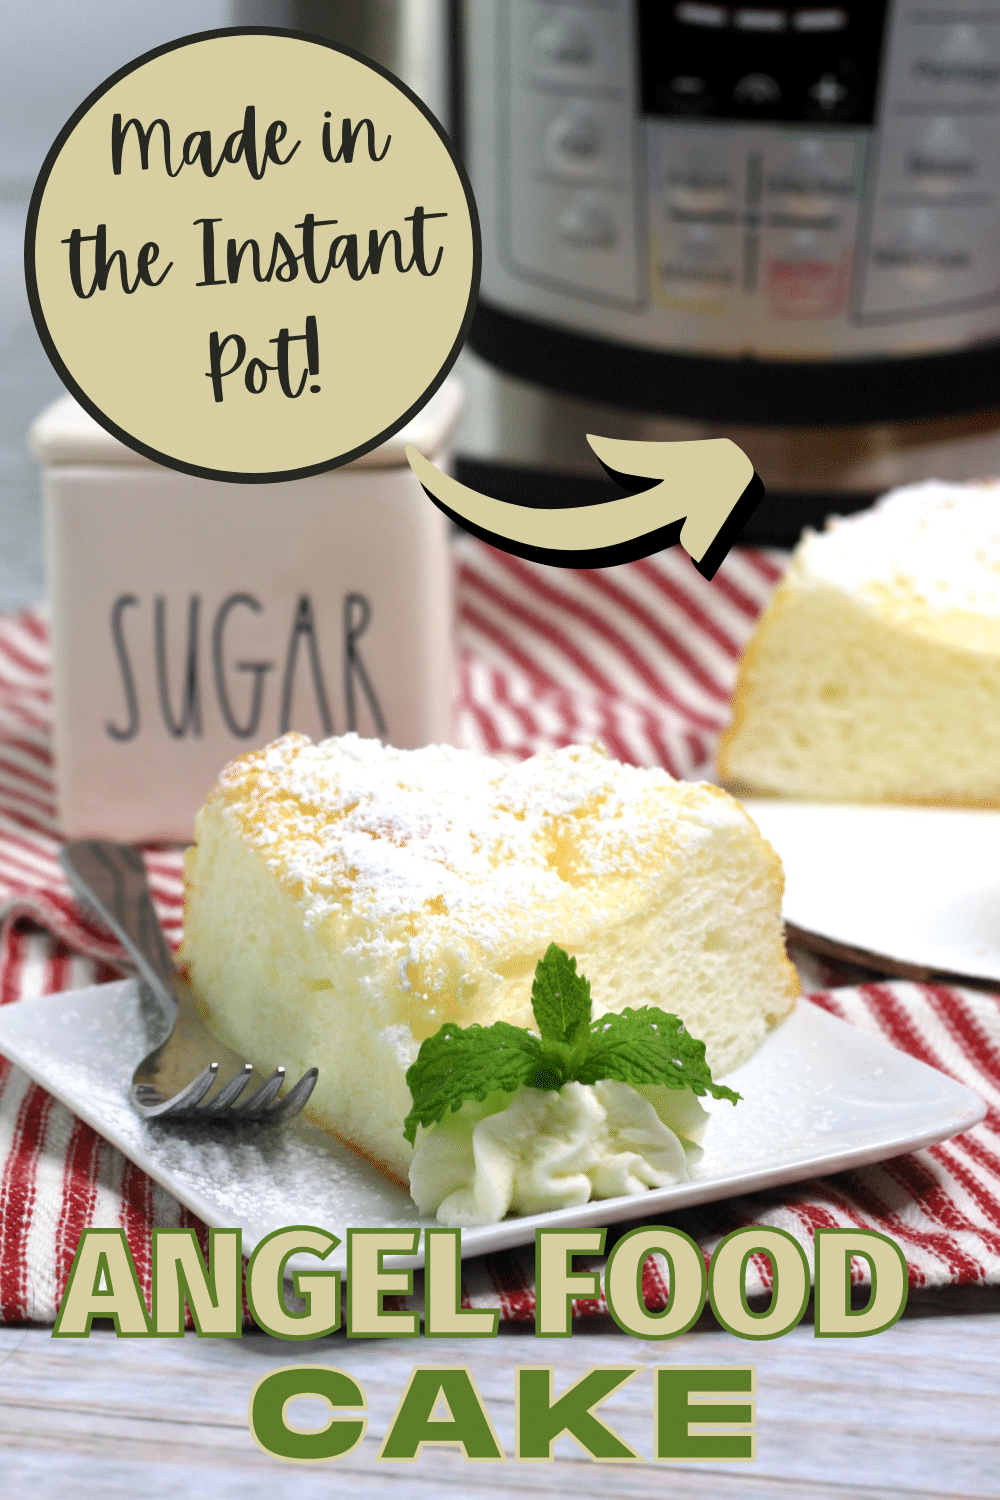 Instant Pot Angel Food Cake is an impressive dessert that is both easy and fast to make. You'll have a decadent cake perfect for any occasion. #instantpot #pressurecooker #angelfoodcake #recipe via @wondermomwannab